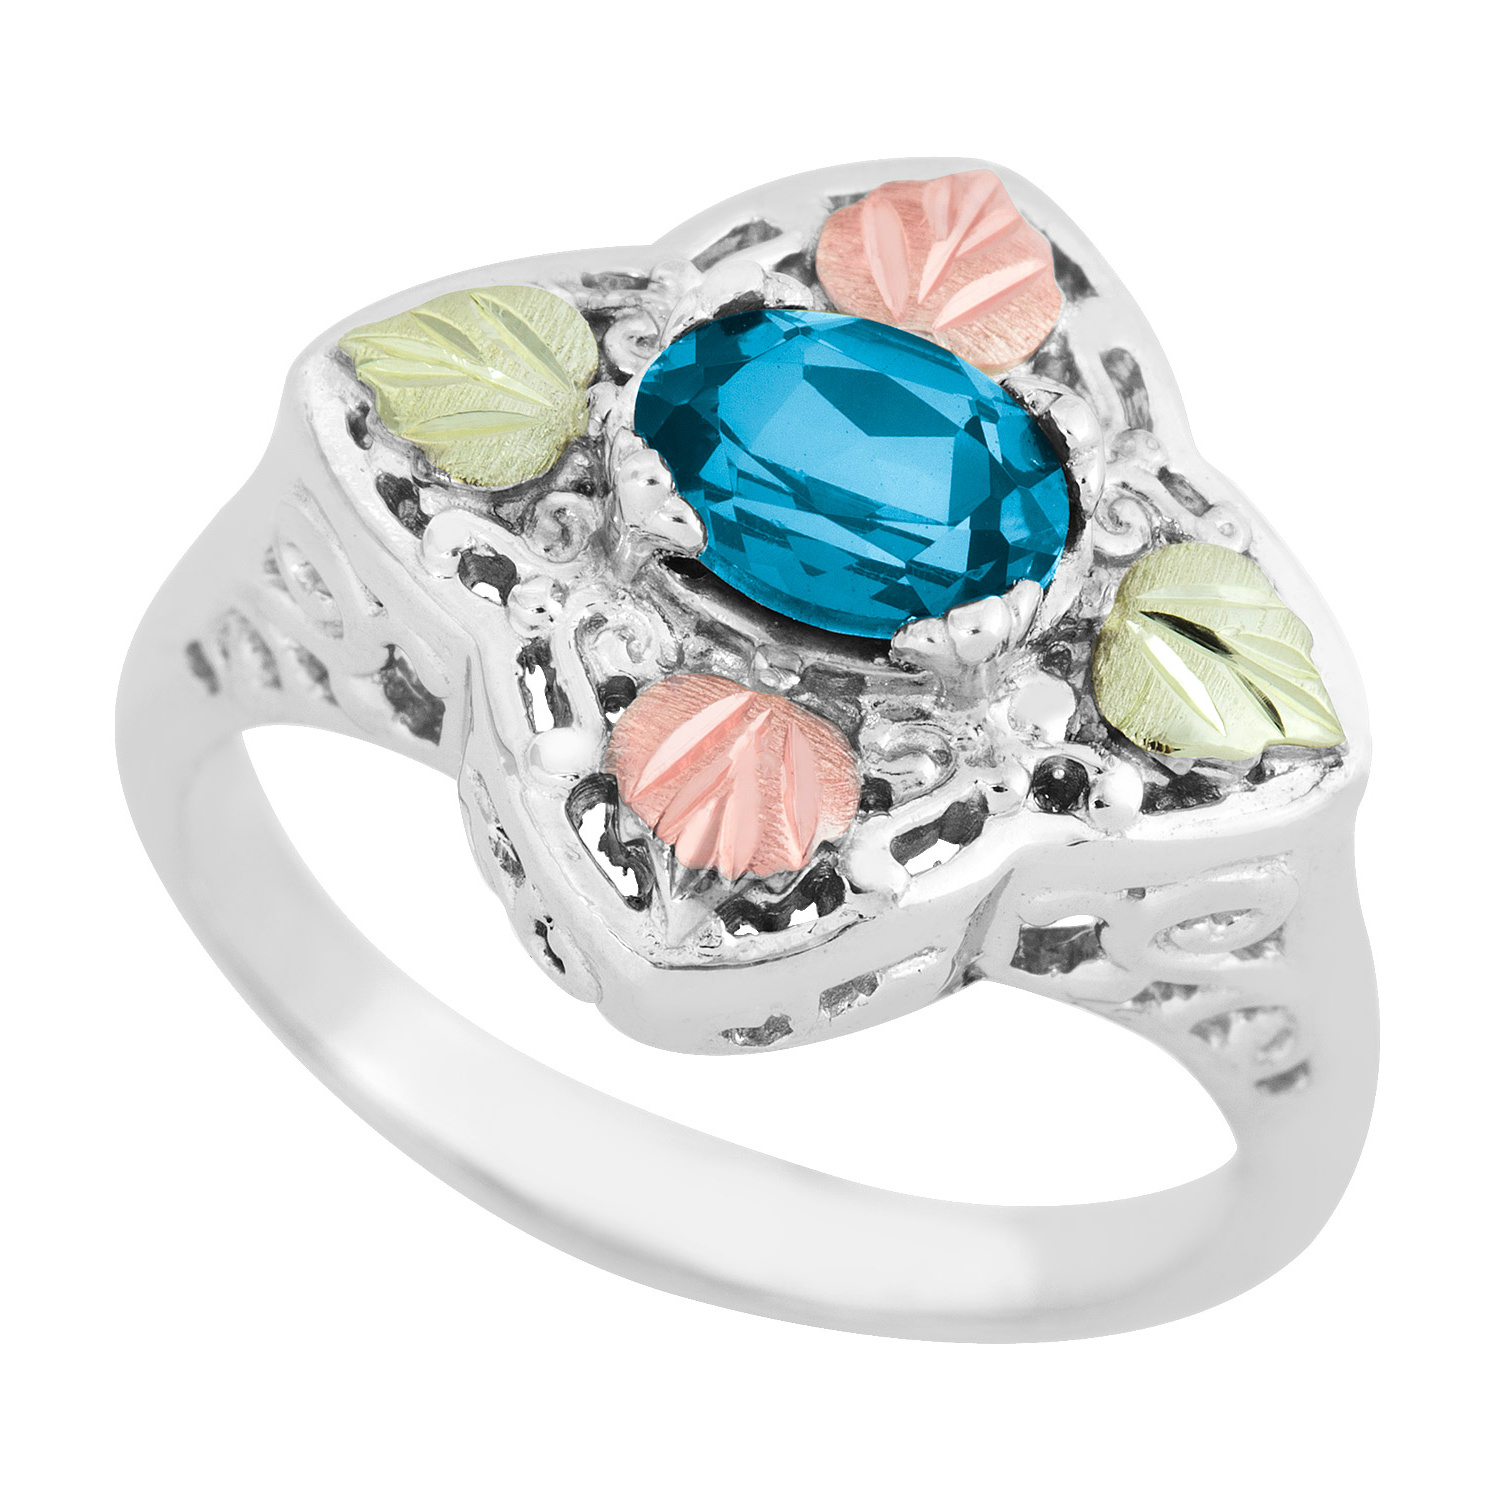 Created Birthstone Ring, Rhodium Plated Sterling Silver, 12k Green and Rose Gold Black Hills Silver Motif.  